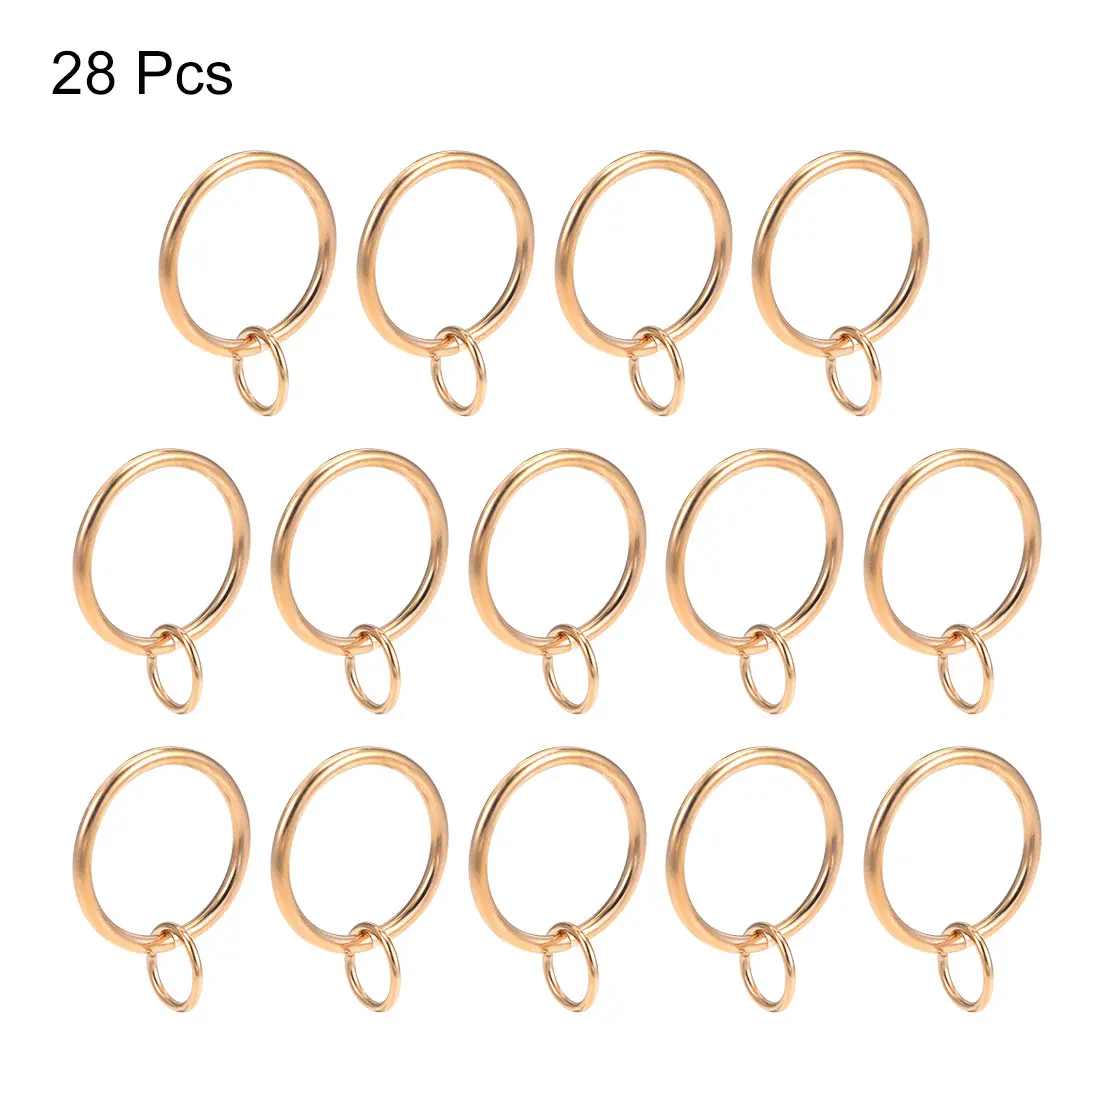 

Uxcell 28Pcs Curtain Rings Metal 32mm Inner Dia Drapery Ring Light Gold Tone for Holding Curtains and Window Curtains